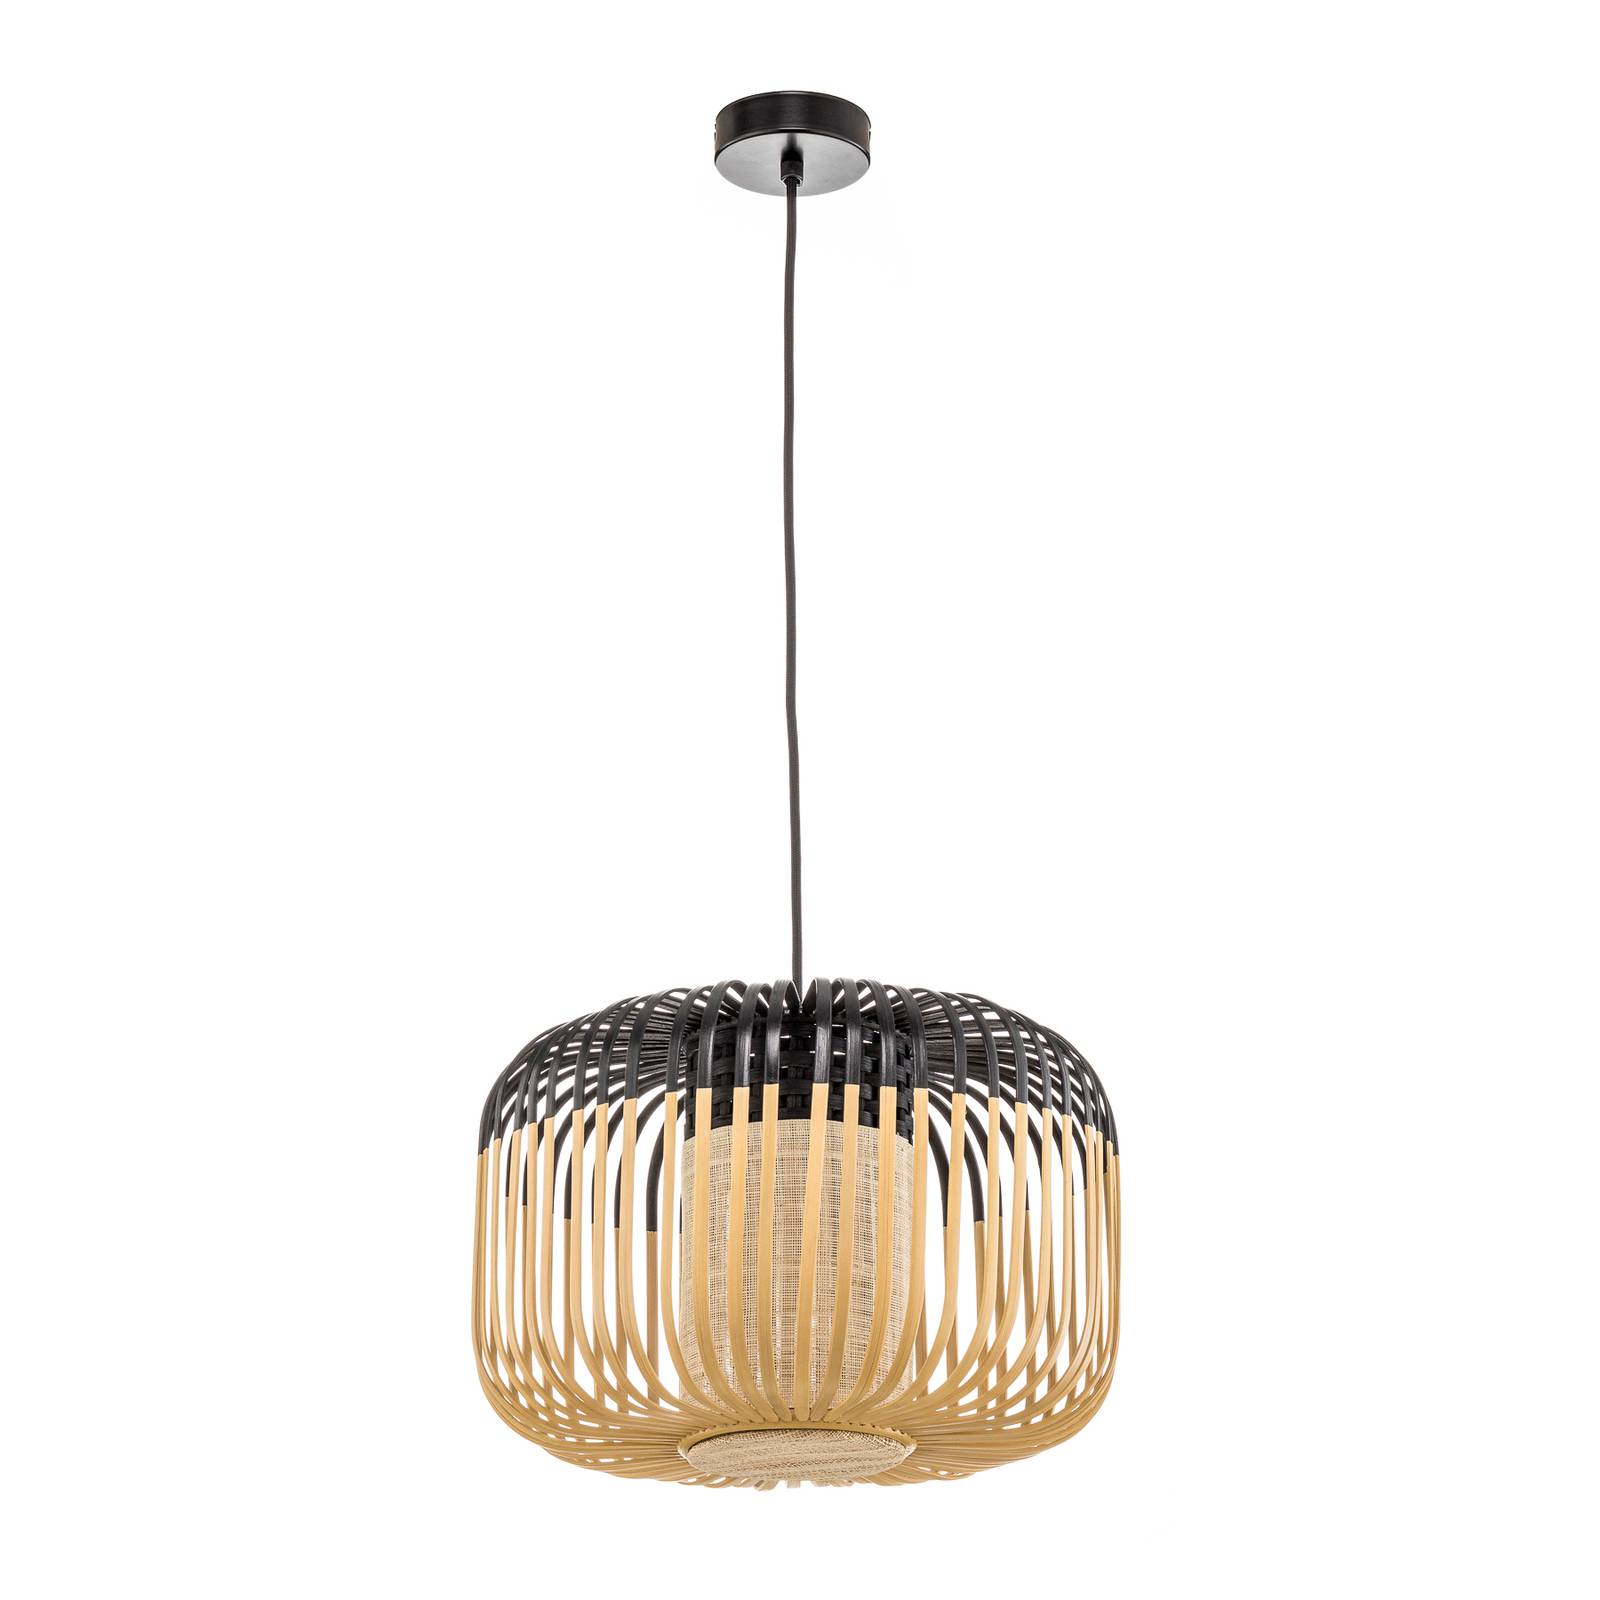 Image of Forestier Bamboo Light S suspension 35 cm noire 3700663909029